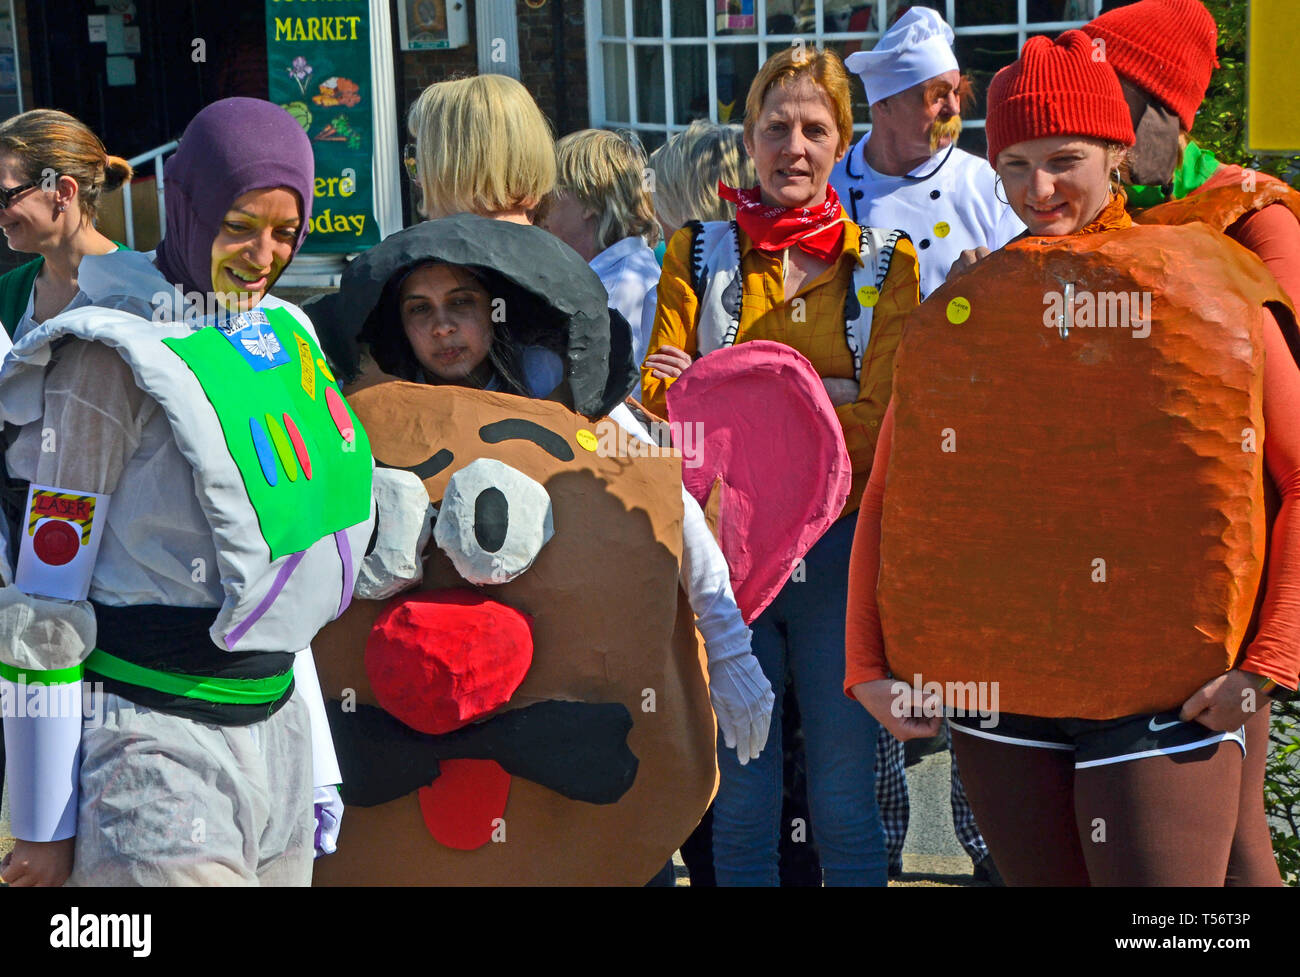 A cartoon characters team taking part in the annual Good Friday Marbles Competition in fancy dress in Battle Market Square, Battle, East Sussex, UK Stock Photo